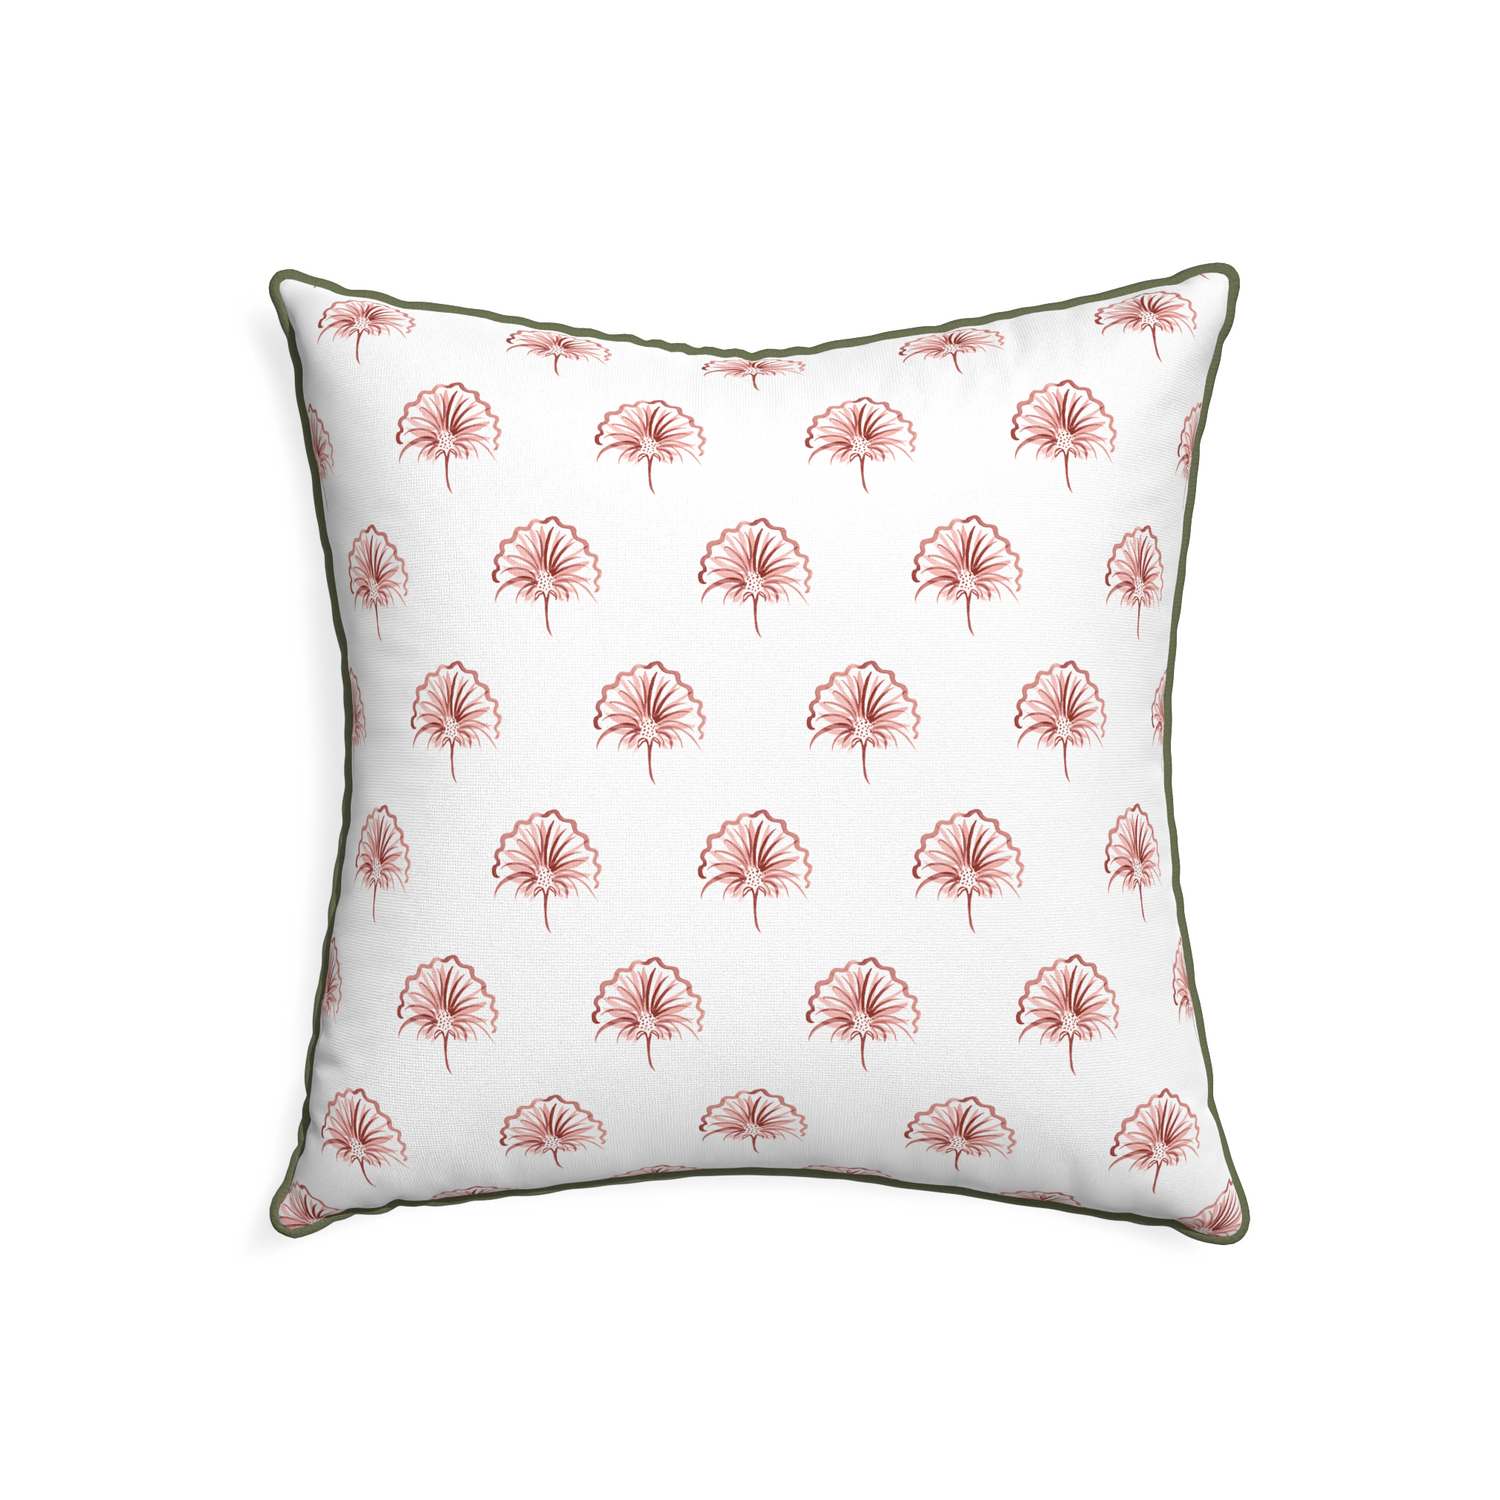 22-square penelope rose custom floral pinkpillow with f piping on white background